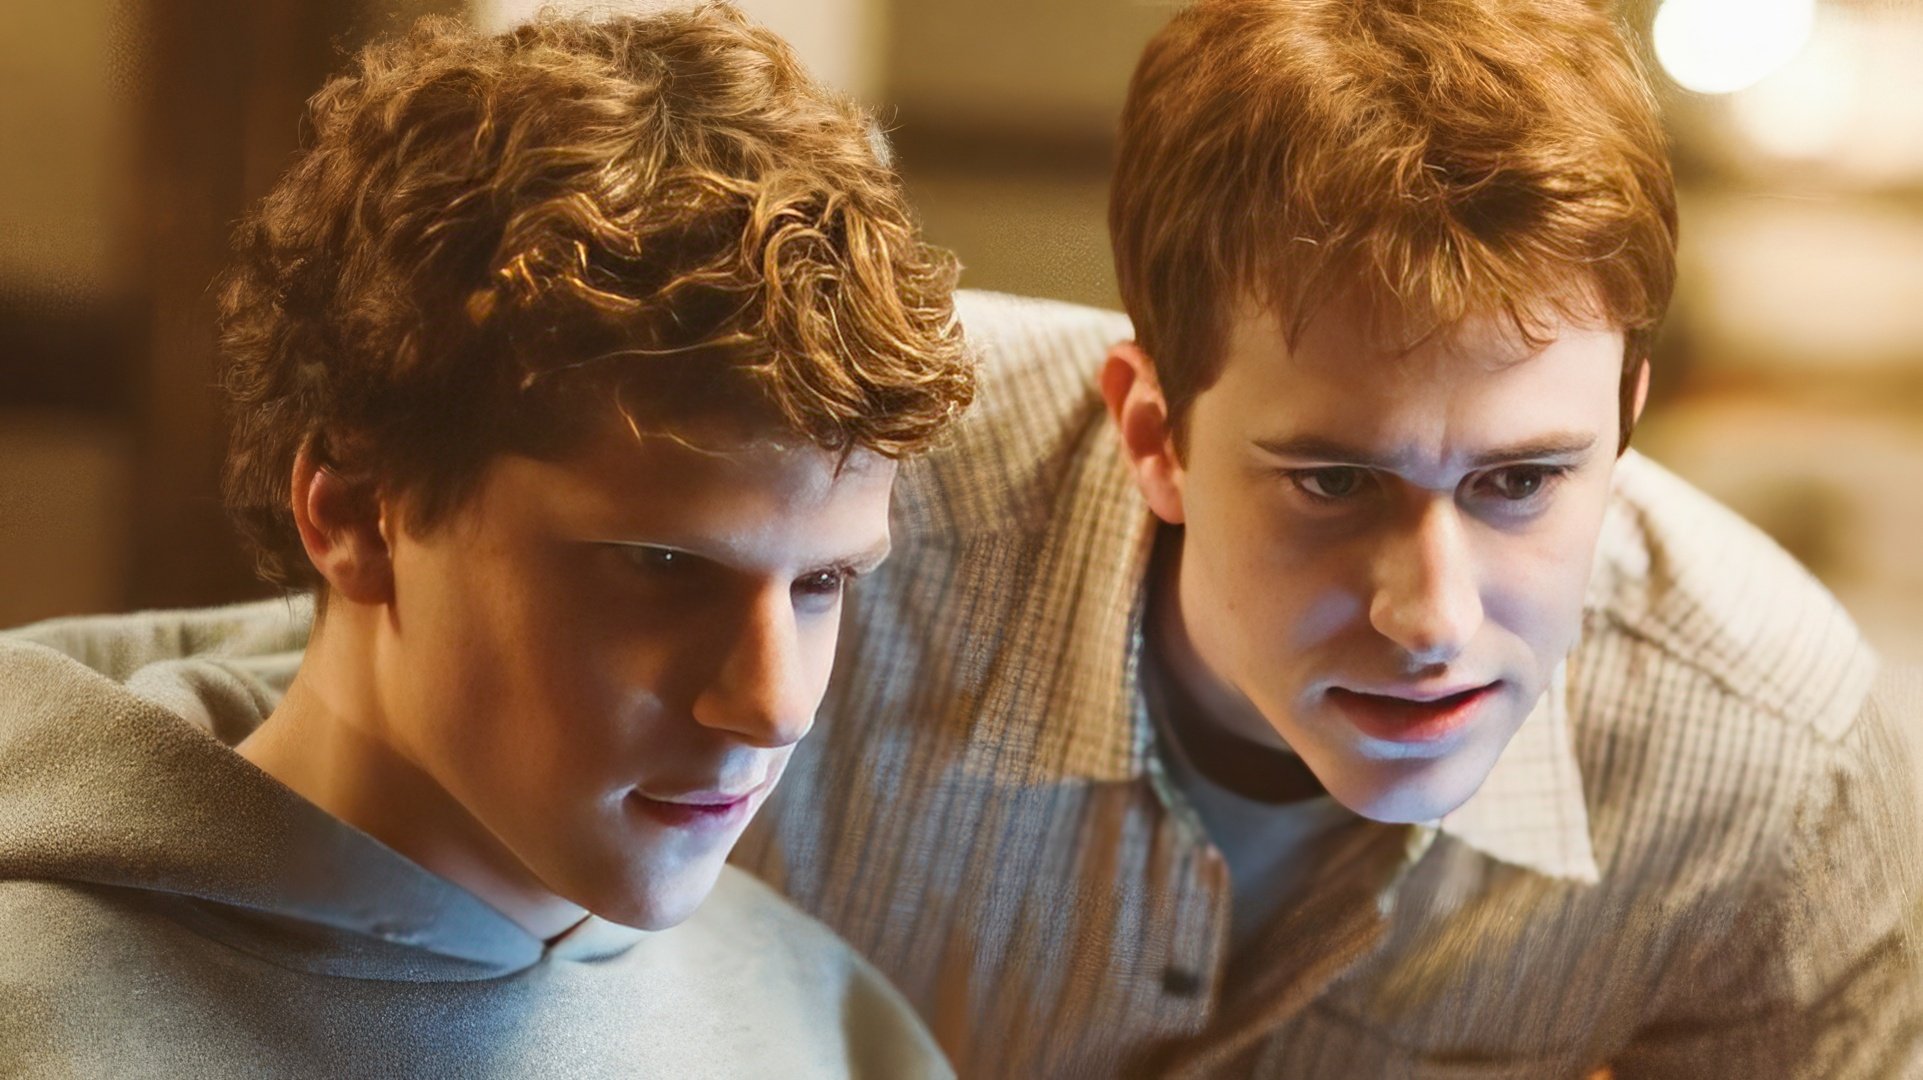 A scene from the movie 'The Social Network'